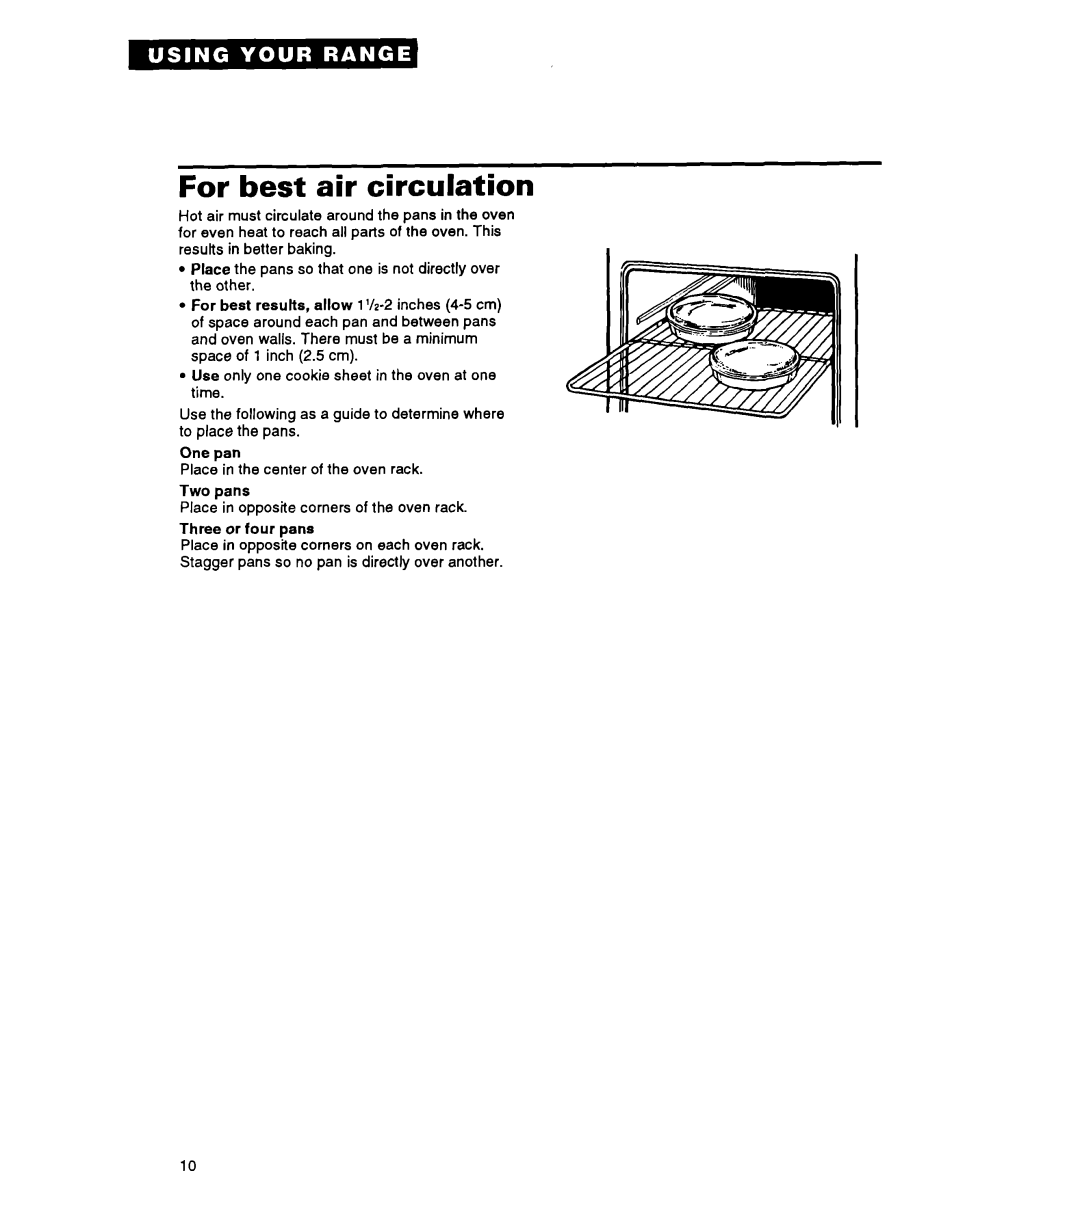 Whirlpool FGP325A manual For best air circulation, One pan, Two pans, Three or four pans 